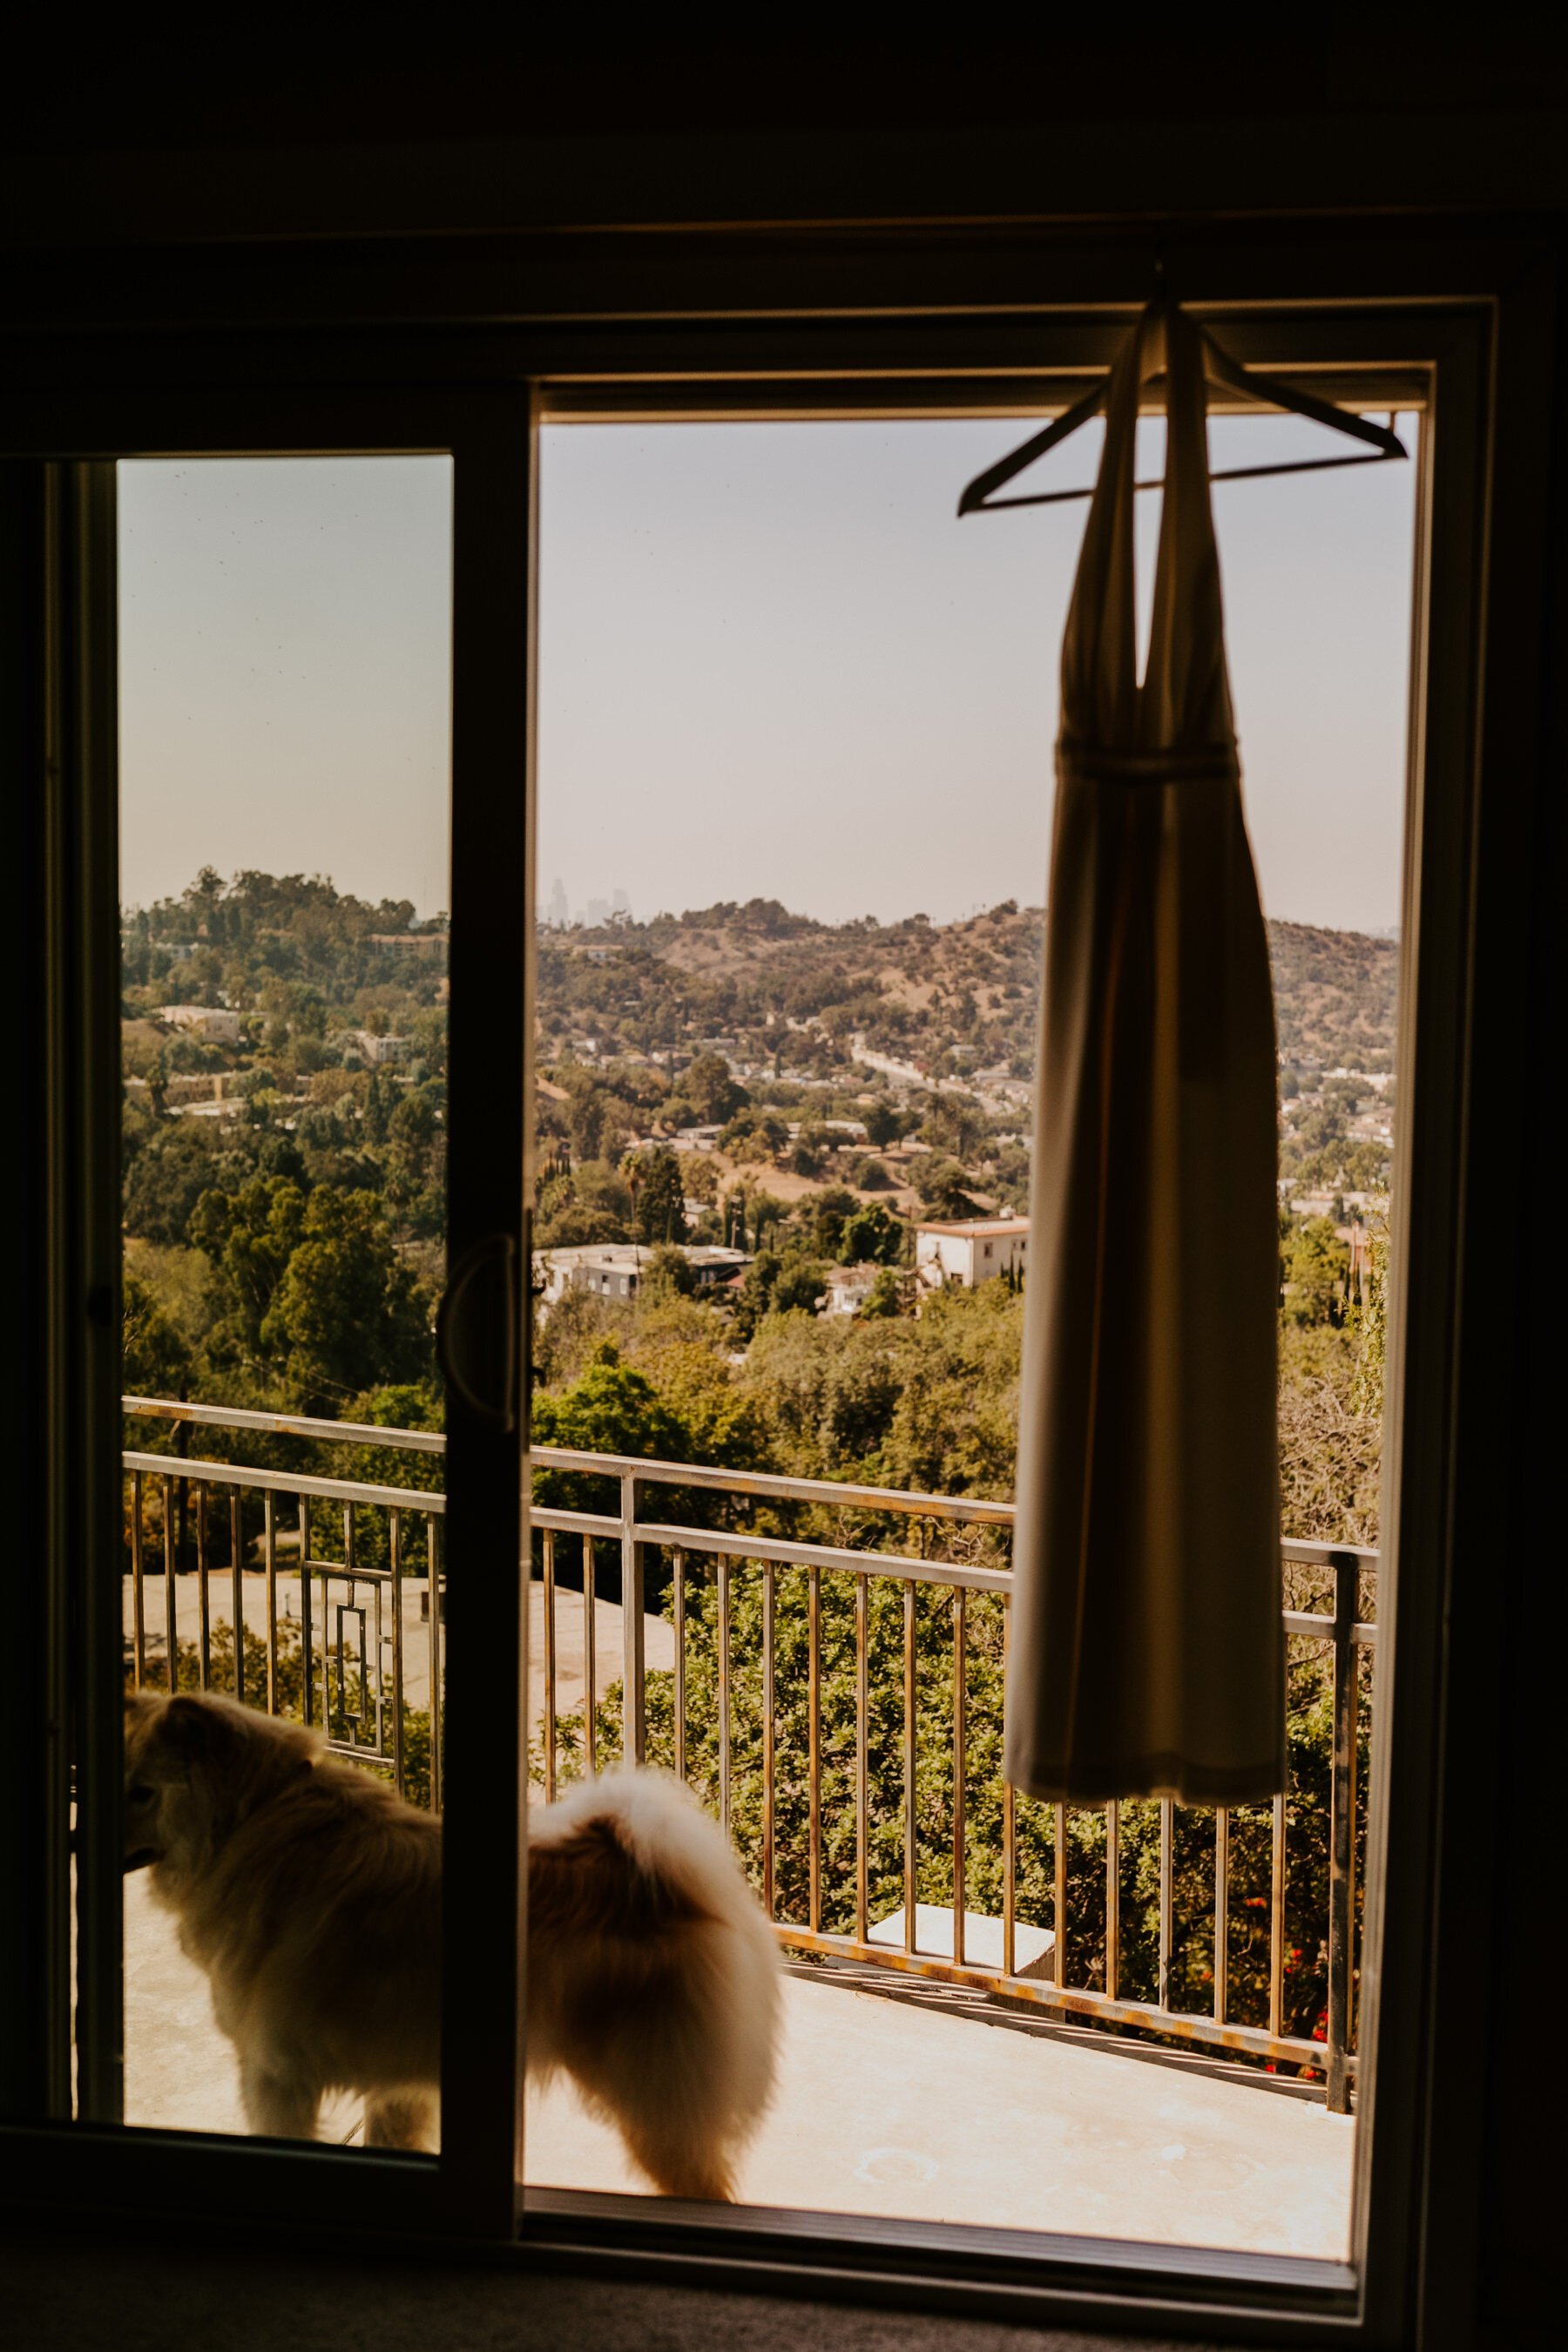 wedding jumpsuit detail photo looking over skyline window view and dog | Tida Svy | www.tidasvy.com